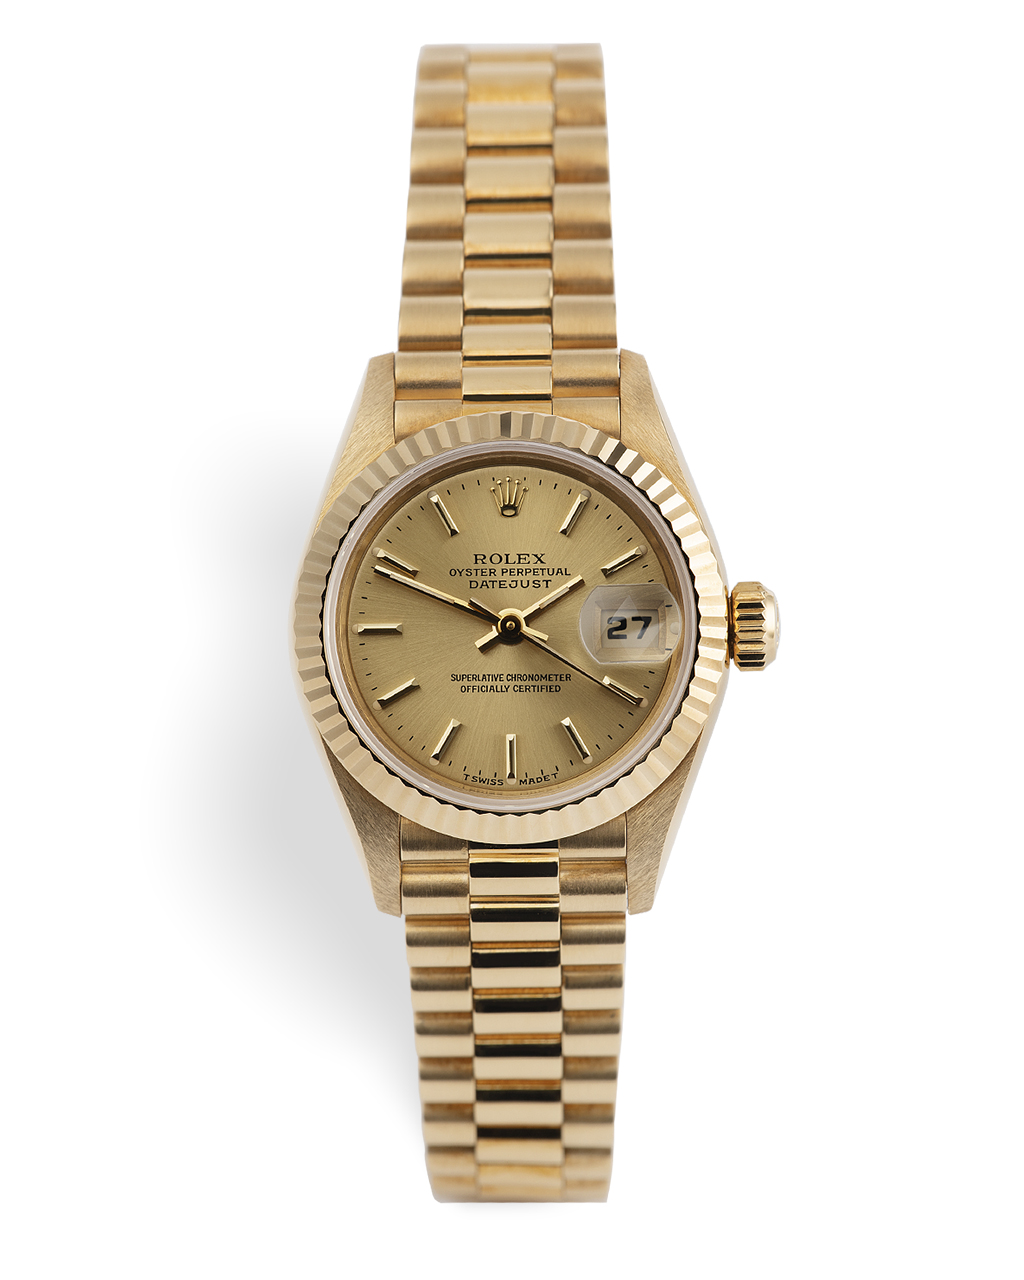 Rolex Datejust Watches | ref 69178 | 'New Old Stock' | The Watch Club